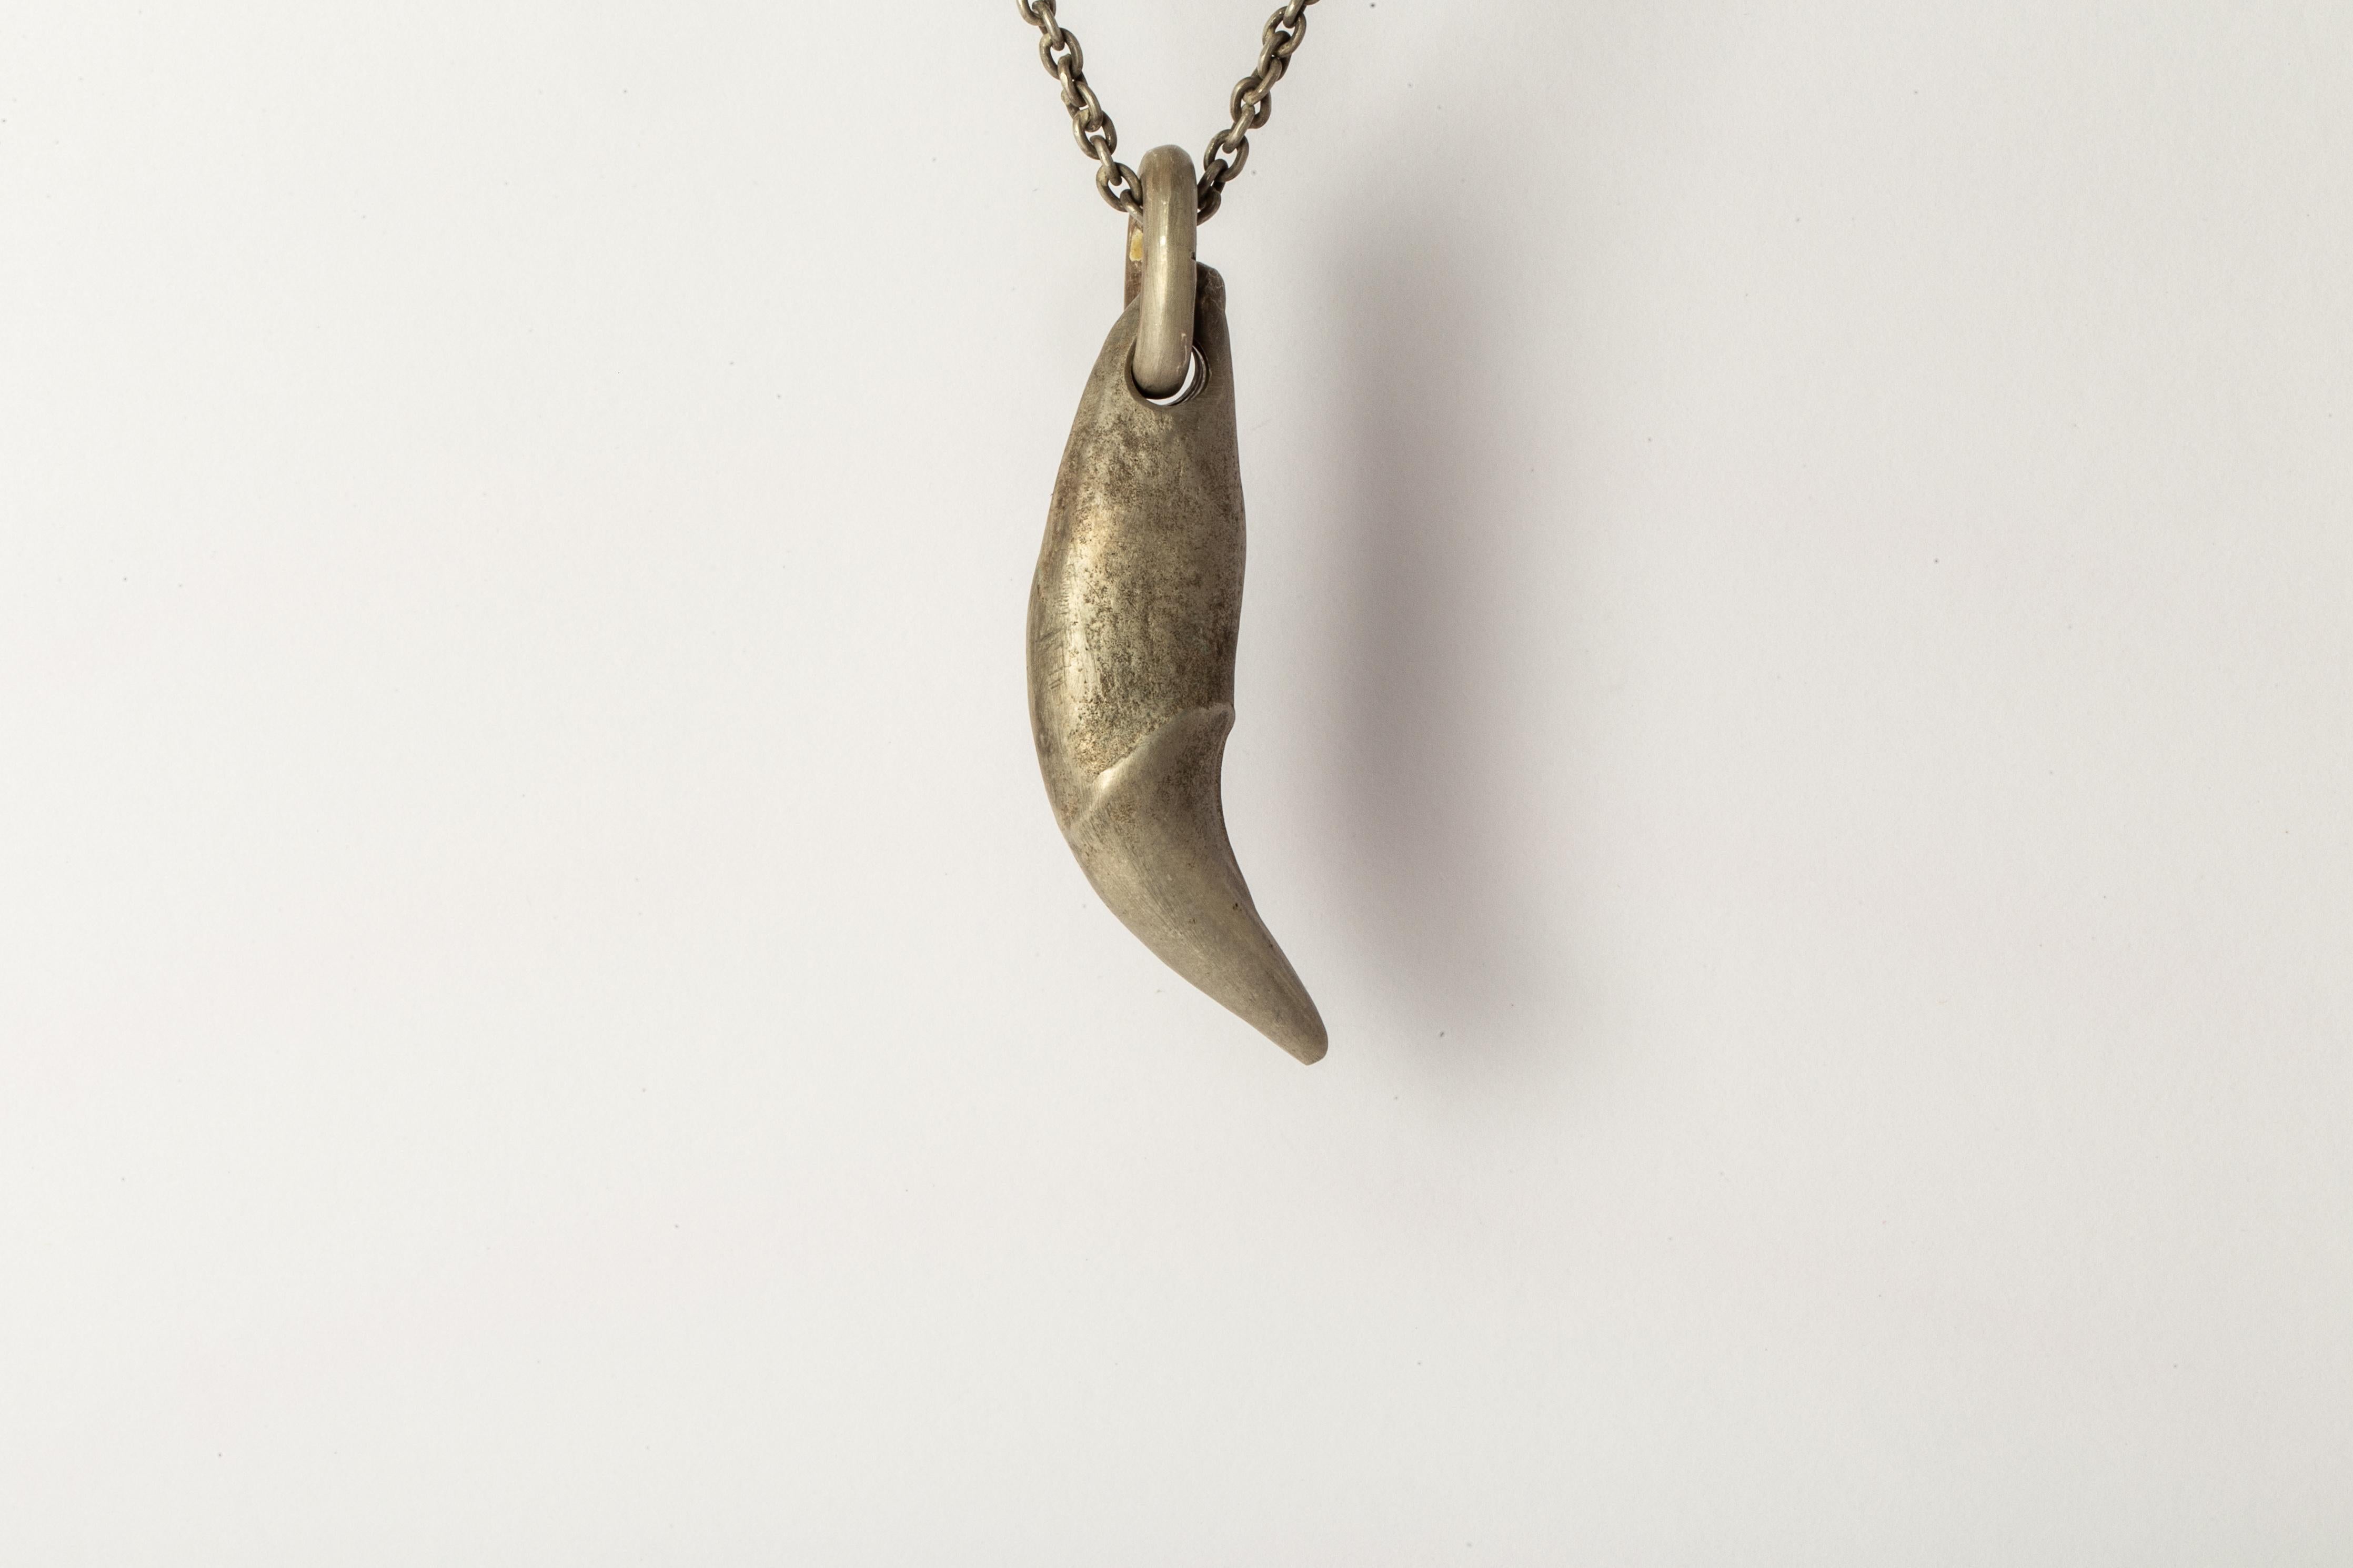 Bear Tooth Necklace Ghost (Small, DA) In New Condition For Sale In Hong Kong, Hong Kong Island